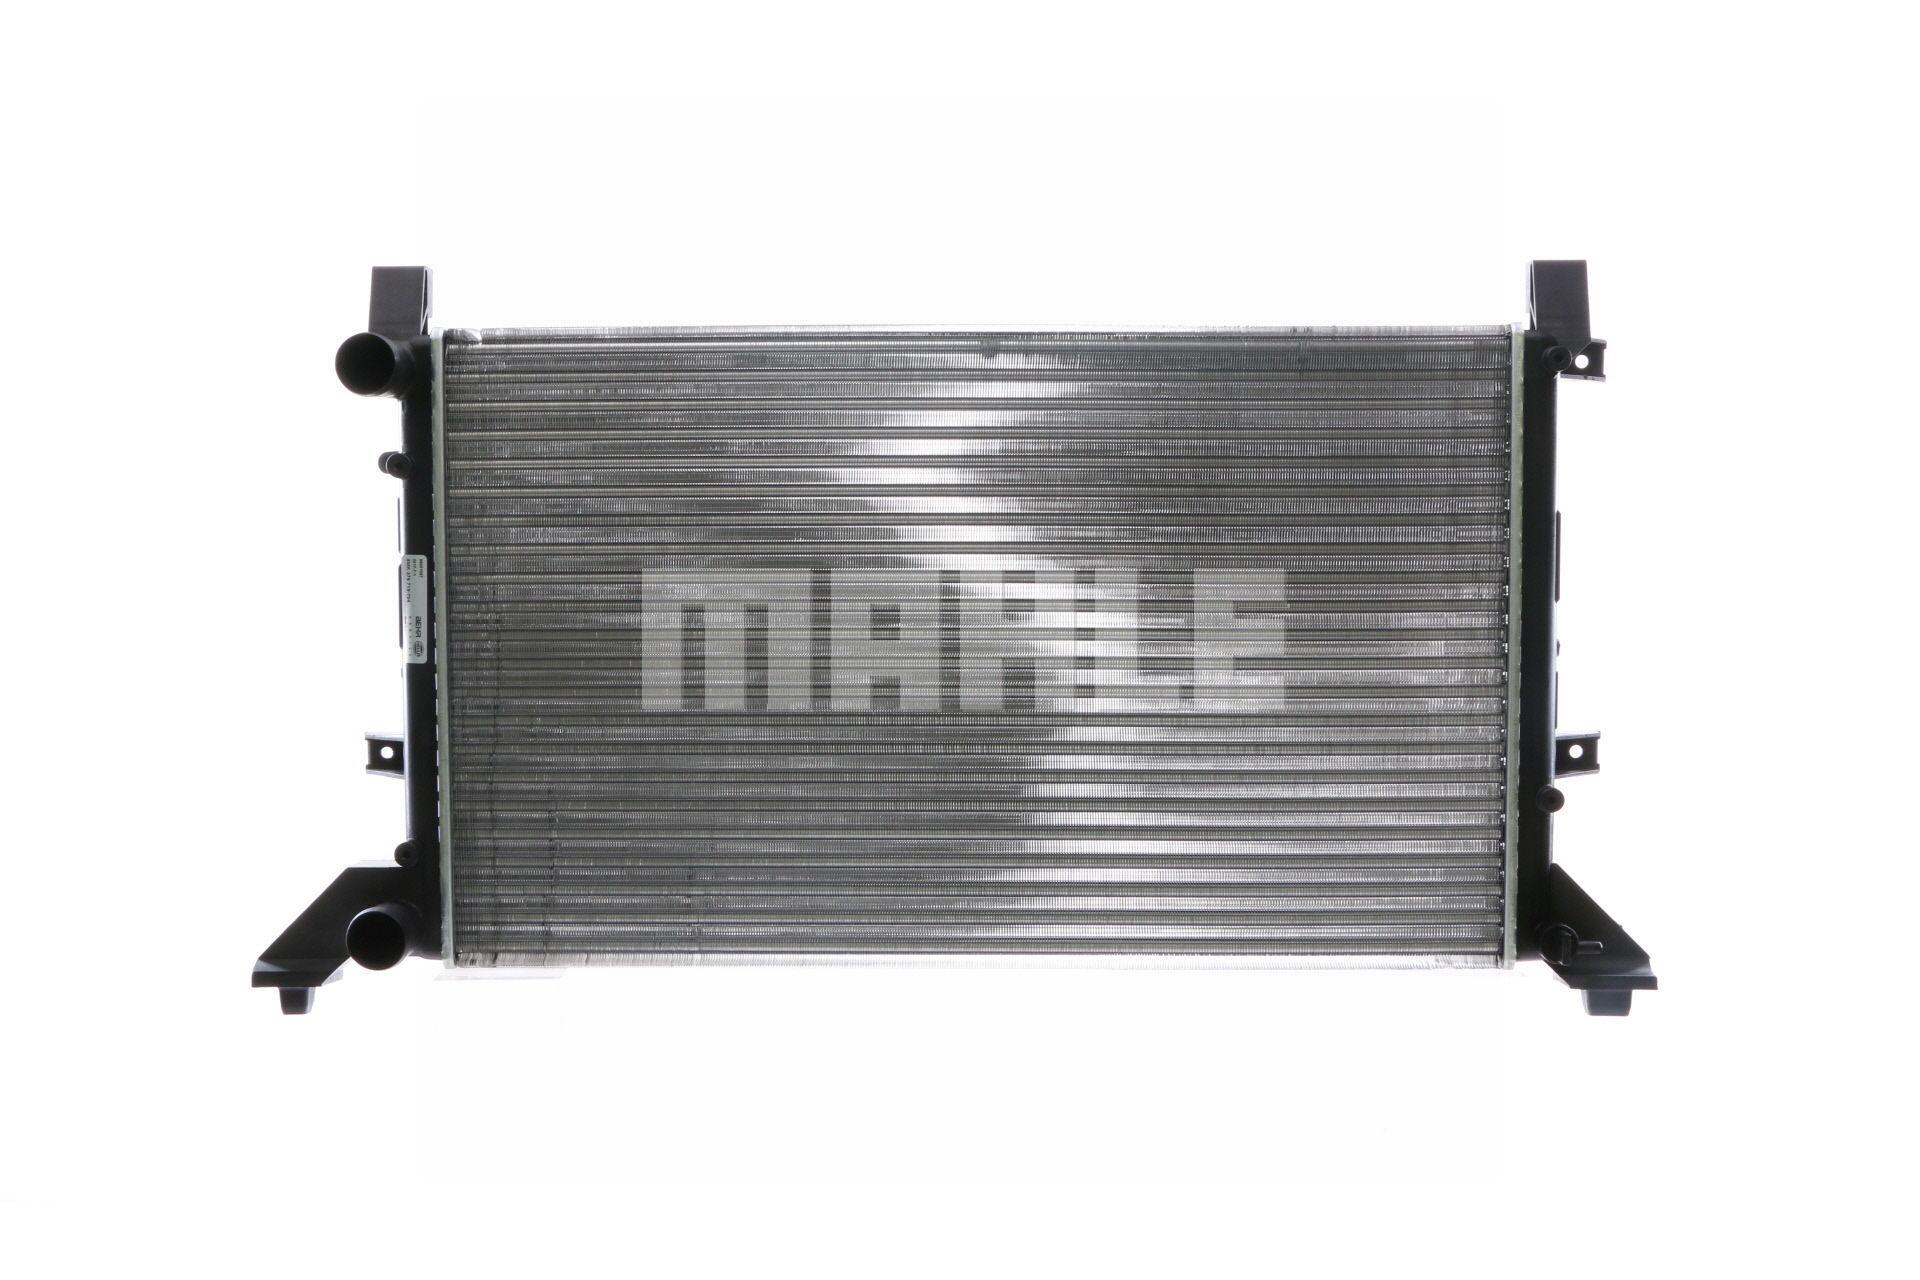 MAHLE ORIGINAL CR 606 000S Engine radiator for vehicles without air conditioning, 682 x 415 x 34 mm, Manual Transmission, Mechanically jointed cooling fins